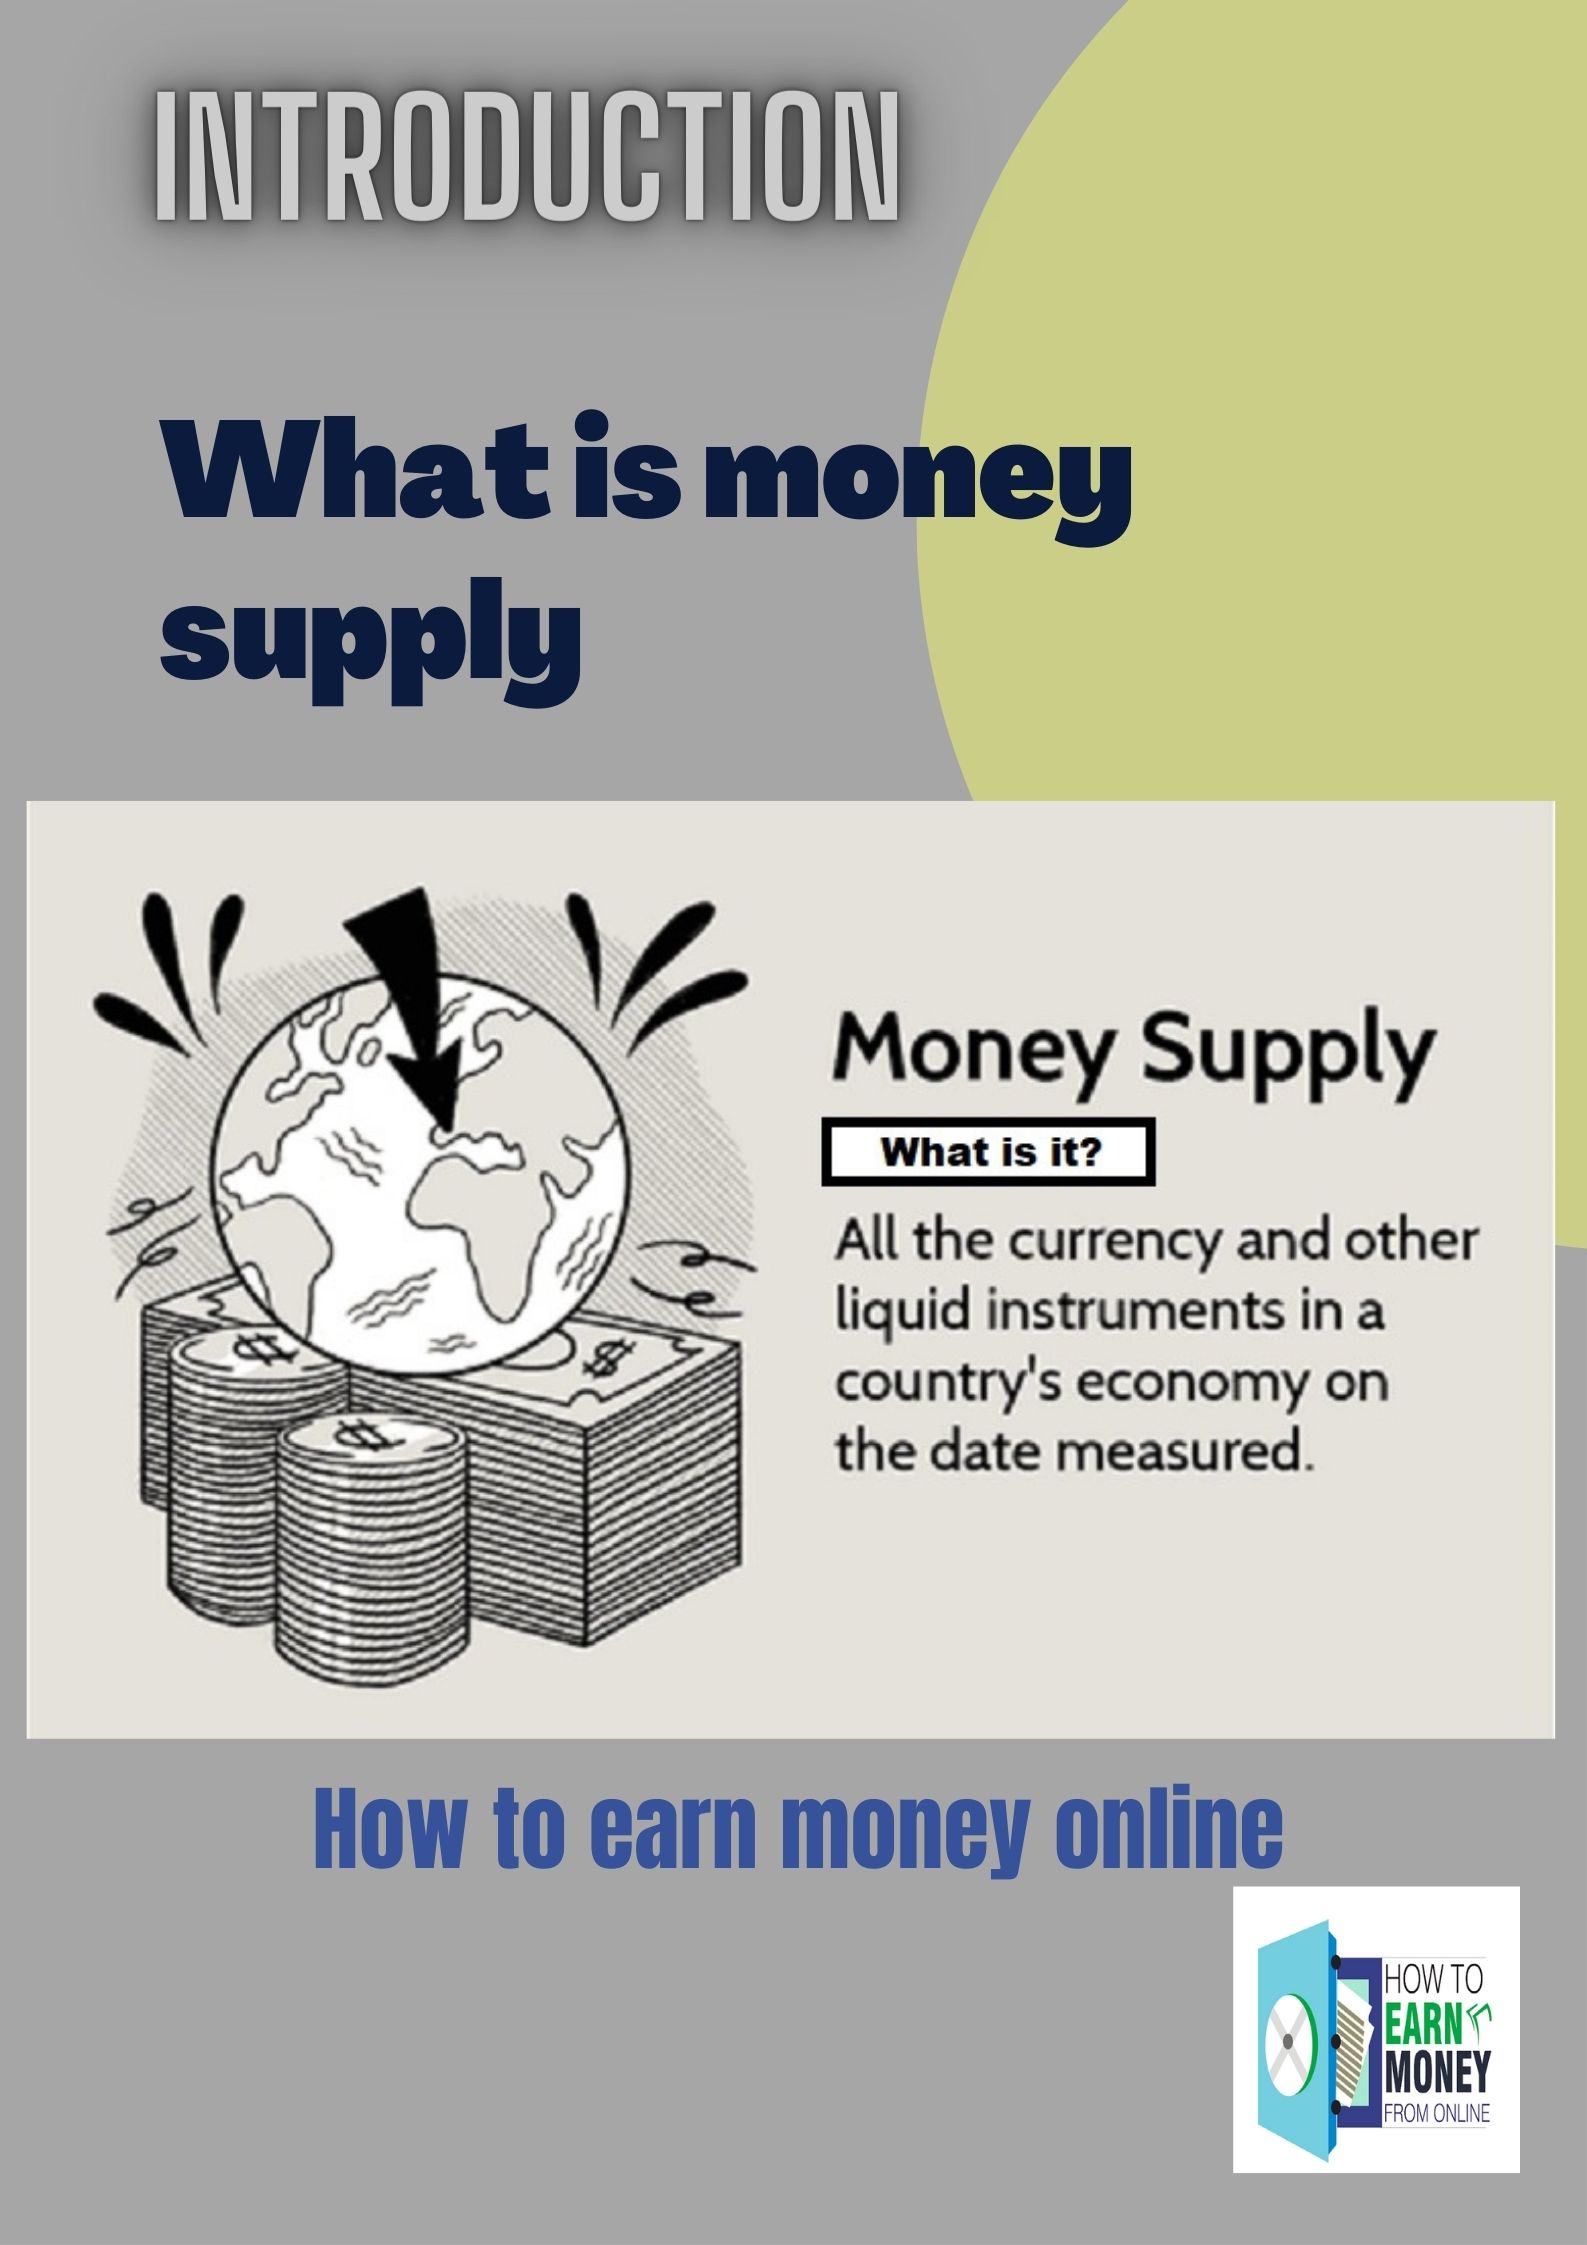 Introduction (What is money supply)